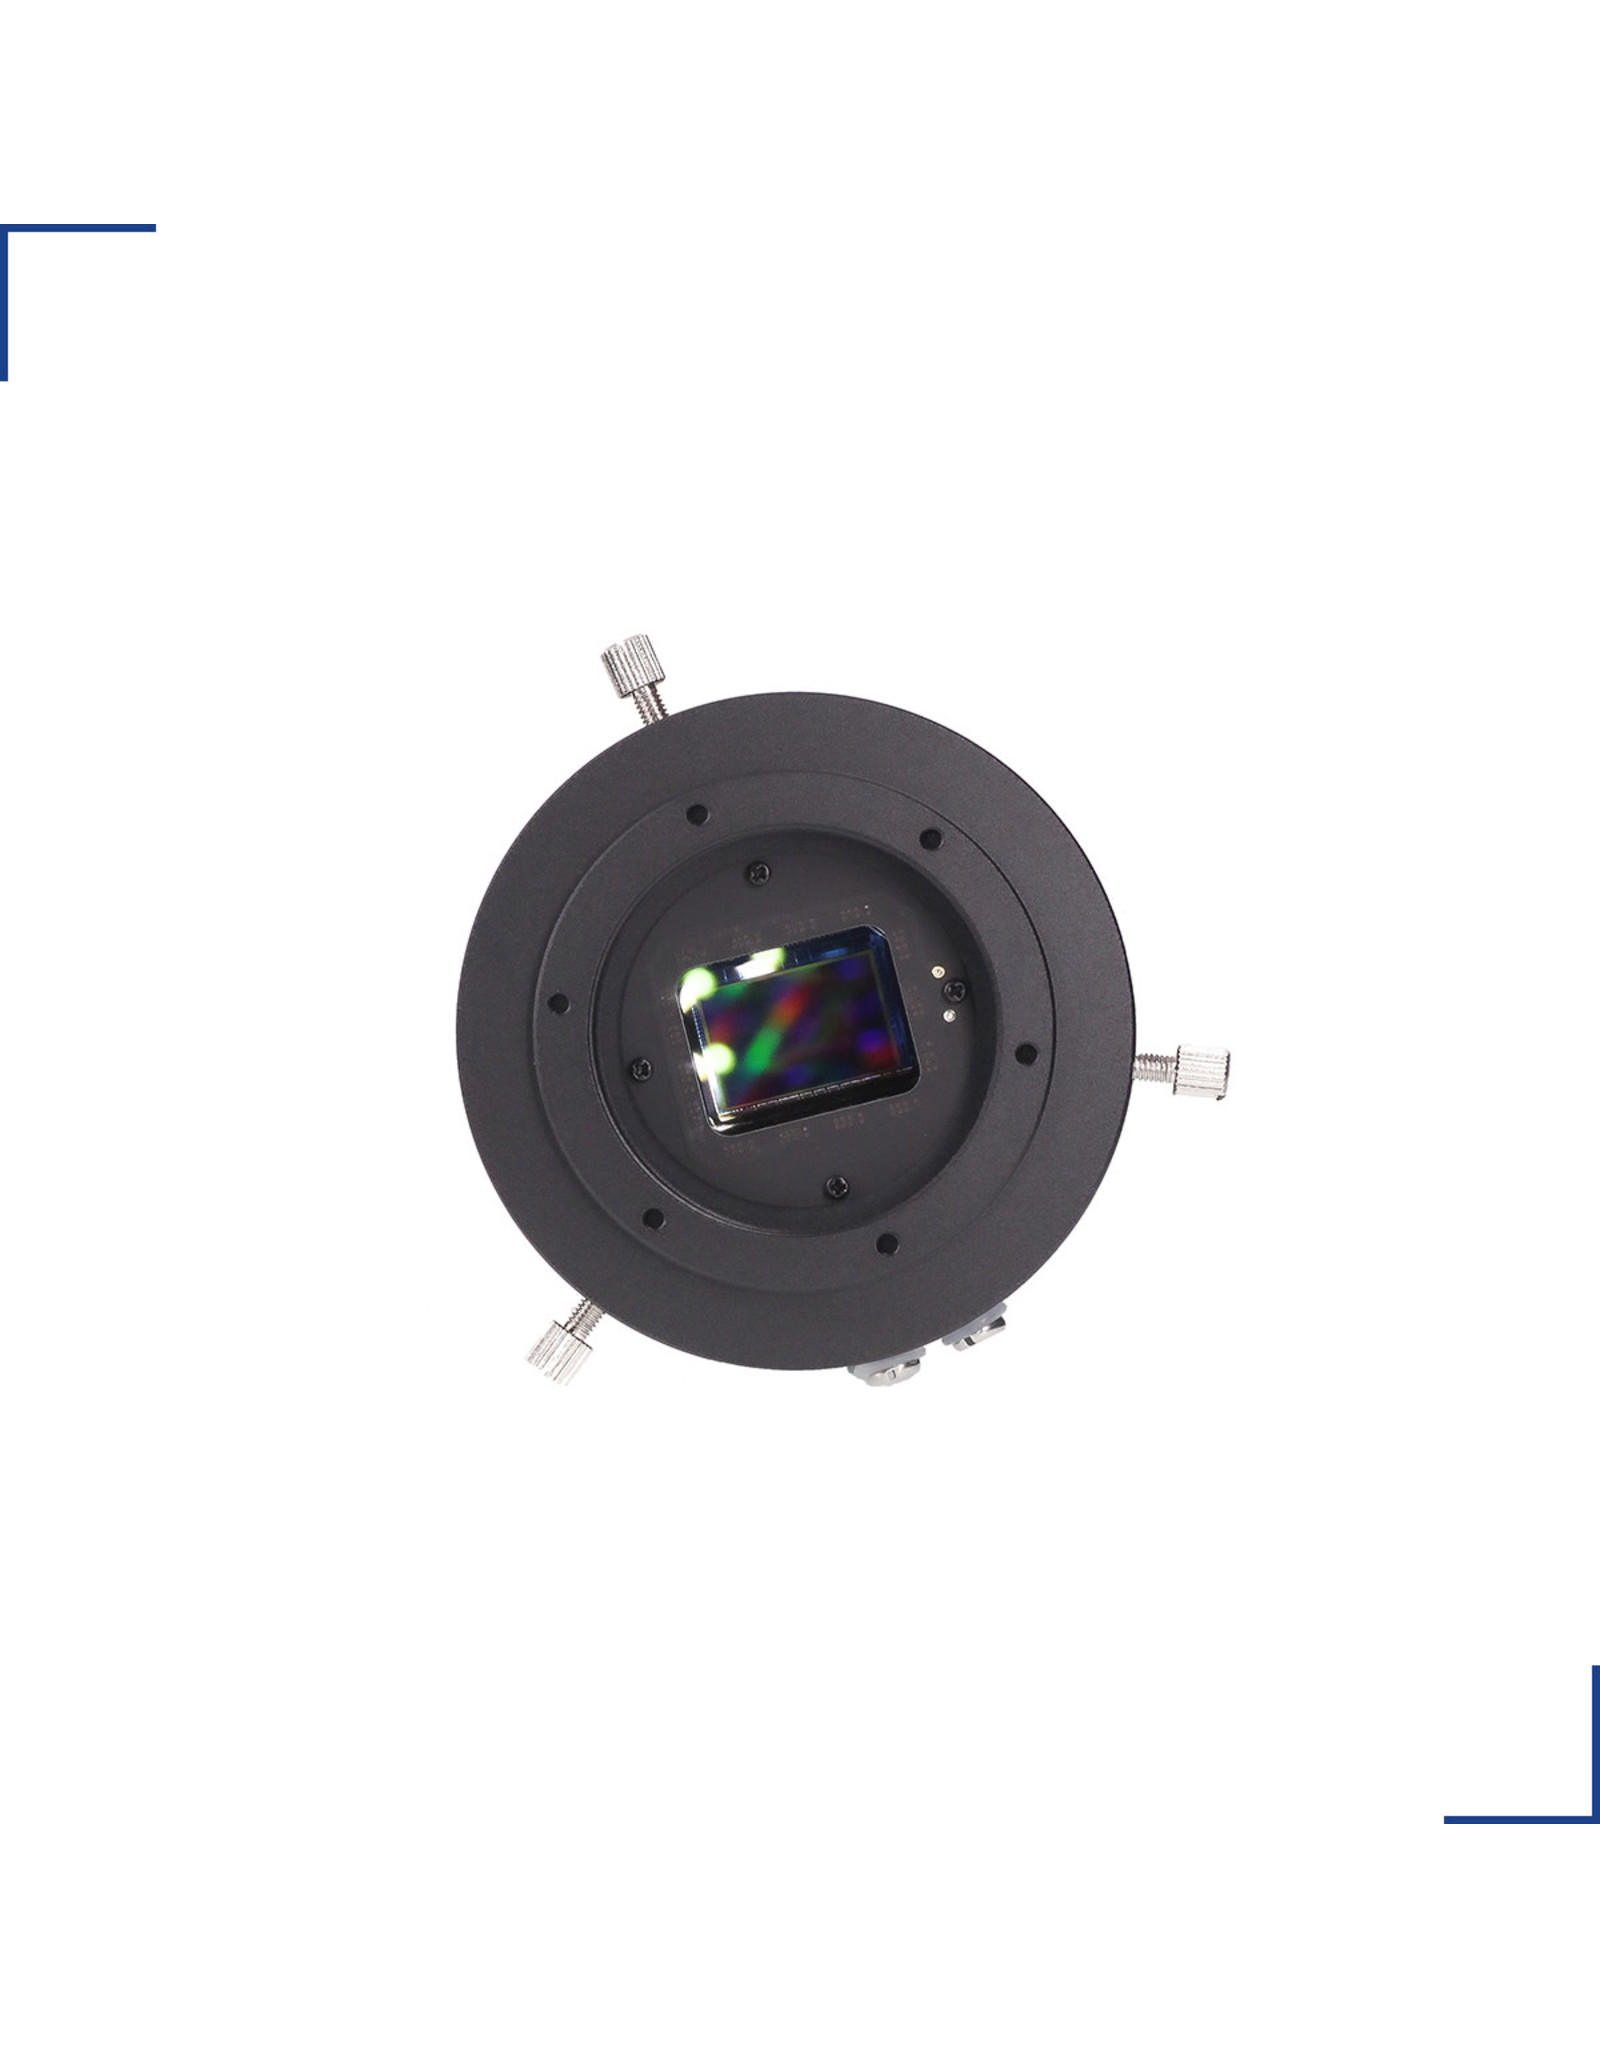 QHYCCD QHY247C Color Astronomical Camera